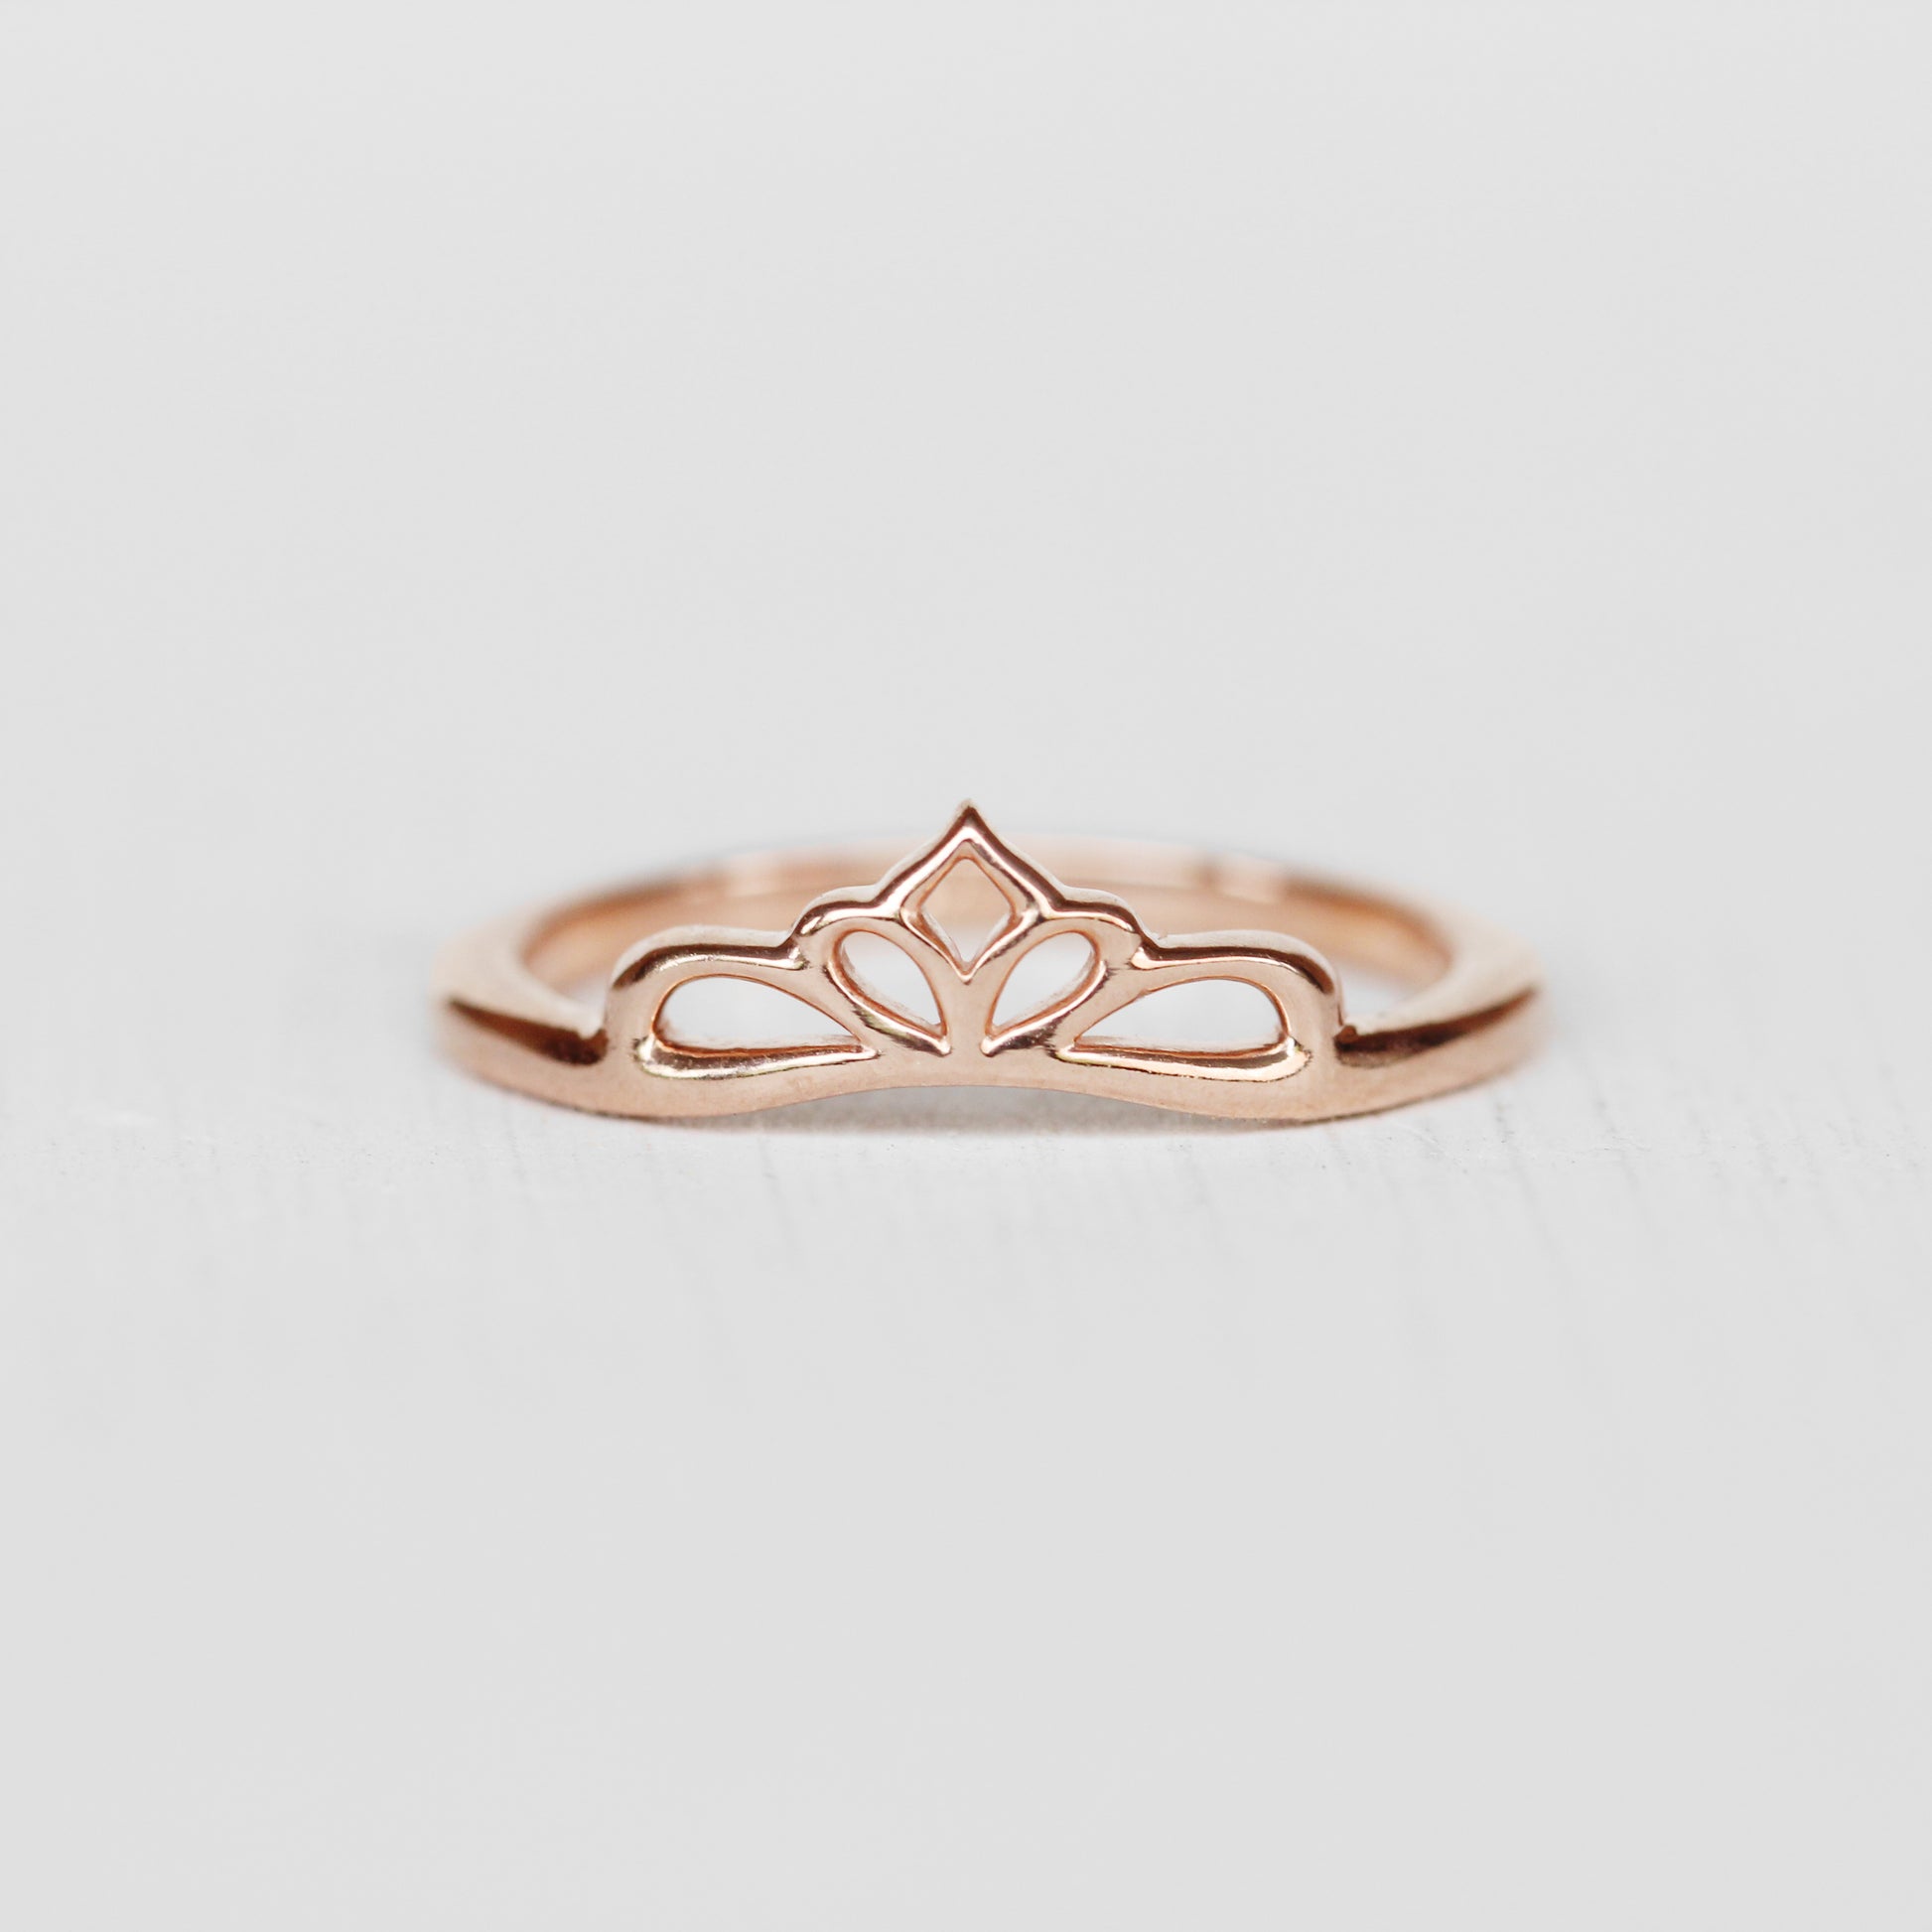 Liesbeth Ring -  Stackable band in 14k Gold - Made to Order - Midwinter Co. Alternative Bridal Rings and Modern Fine Jewelry